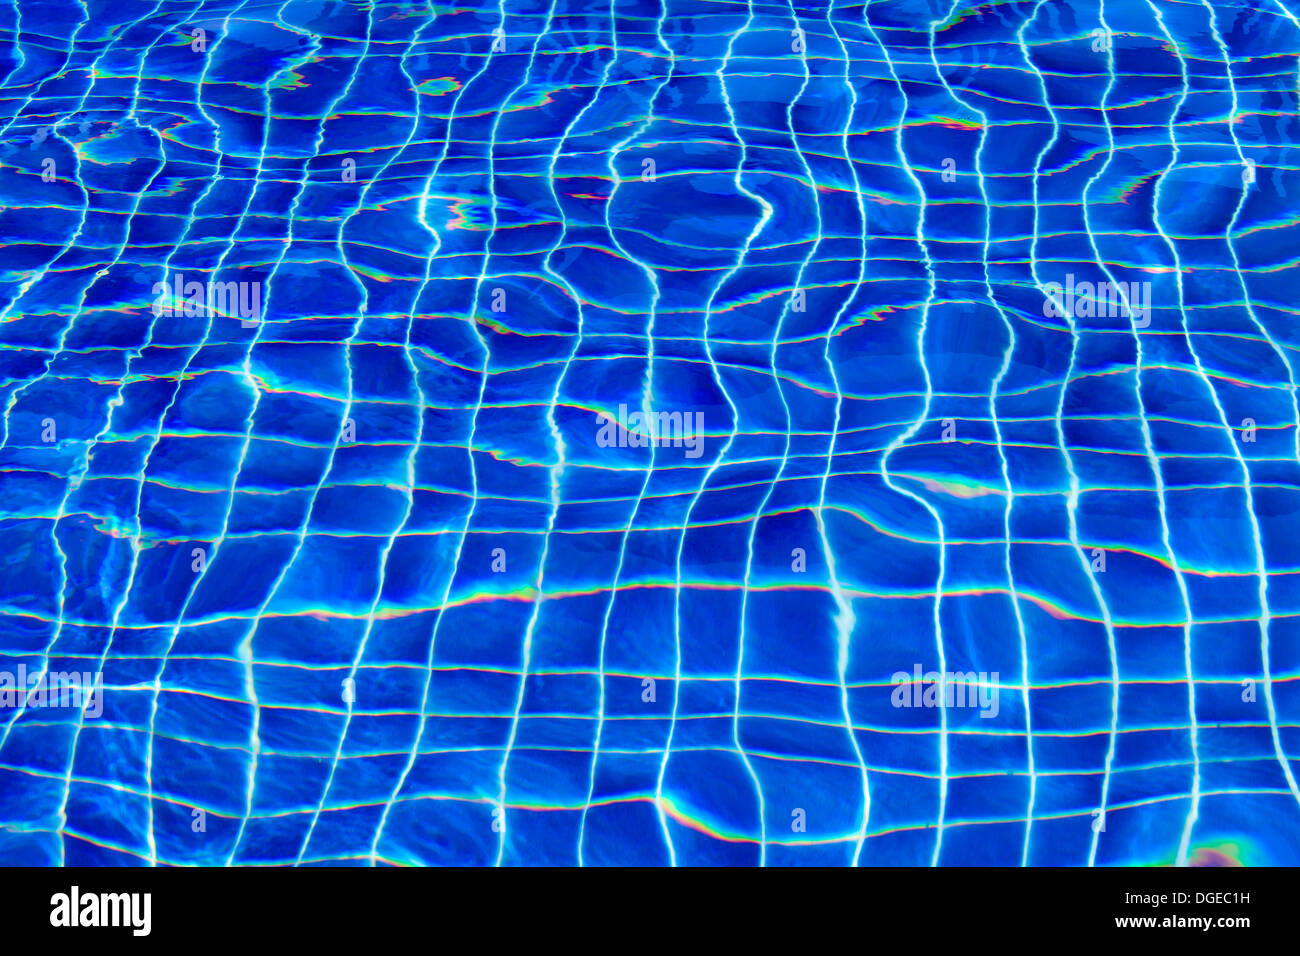 Blue ripped water in swimming pool Stock Photo